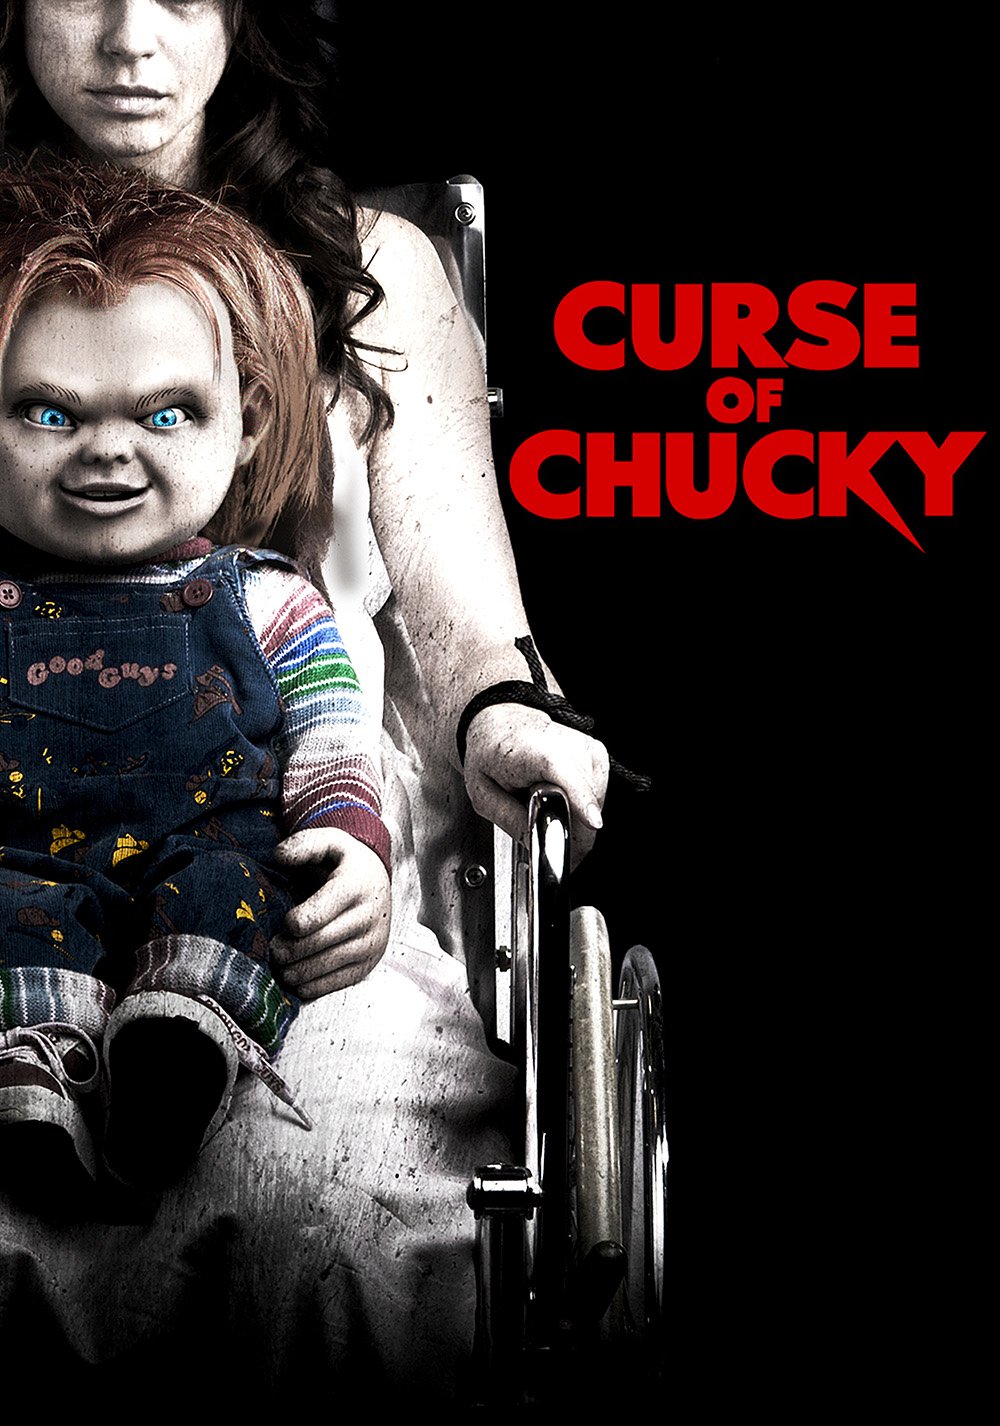 download chucky full movie